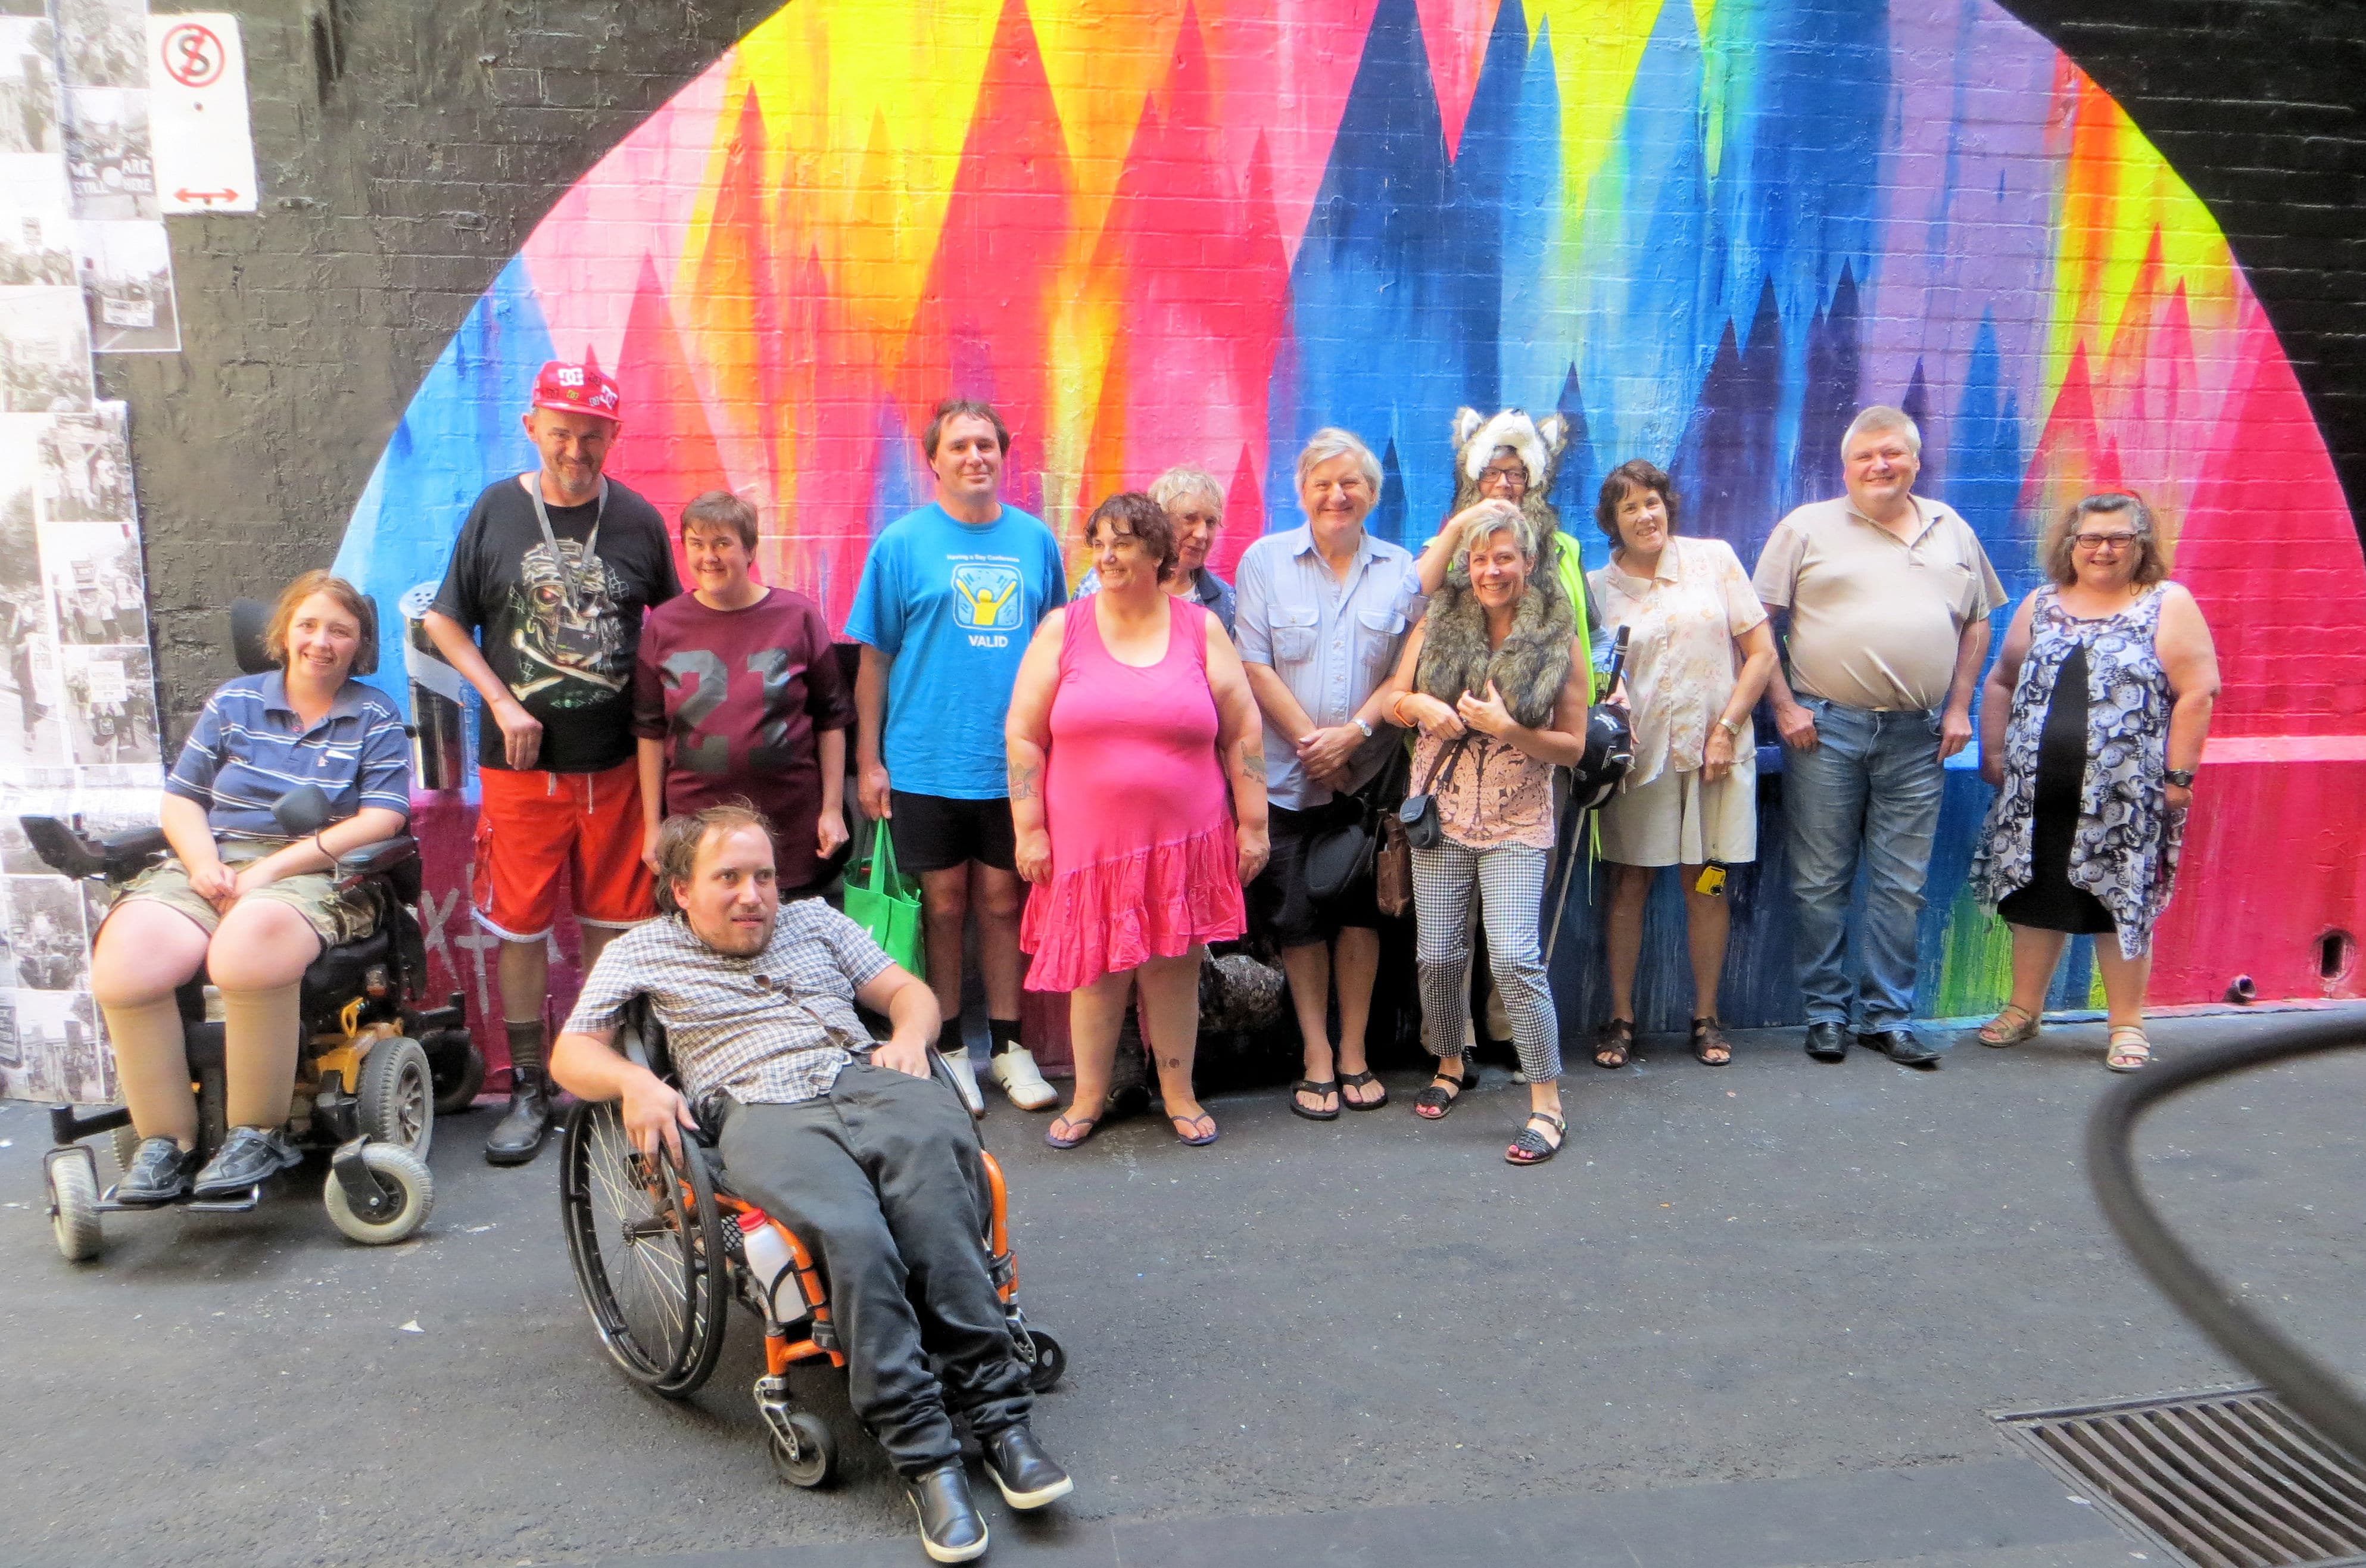 Image of the reinforce committee group standing in front of coloured wall